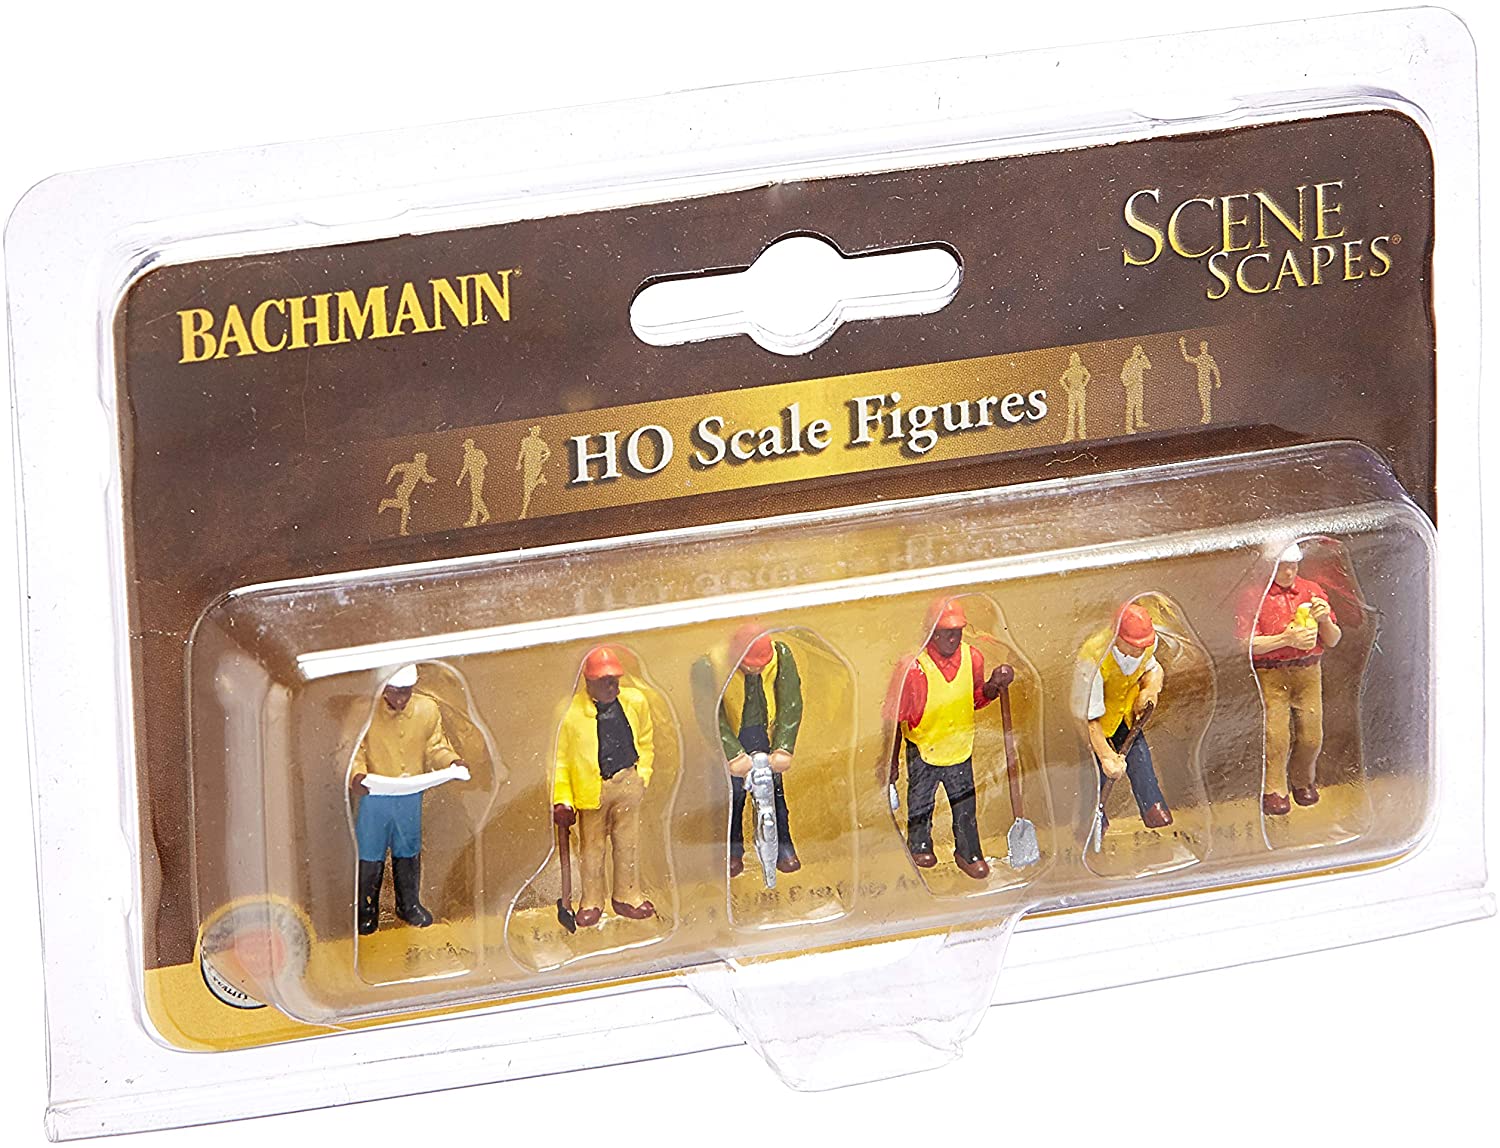 Bachmann 33116 HO Scale Civil Engineers SceneScapes - image 2 of 3